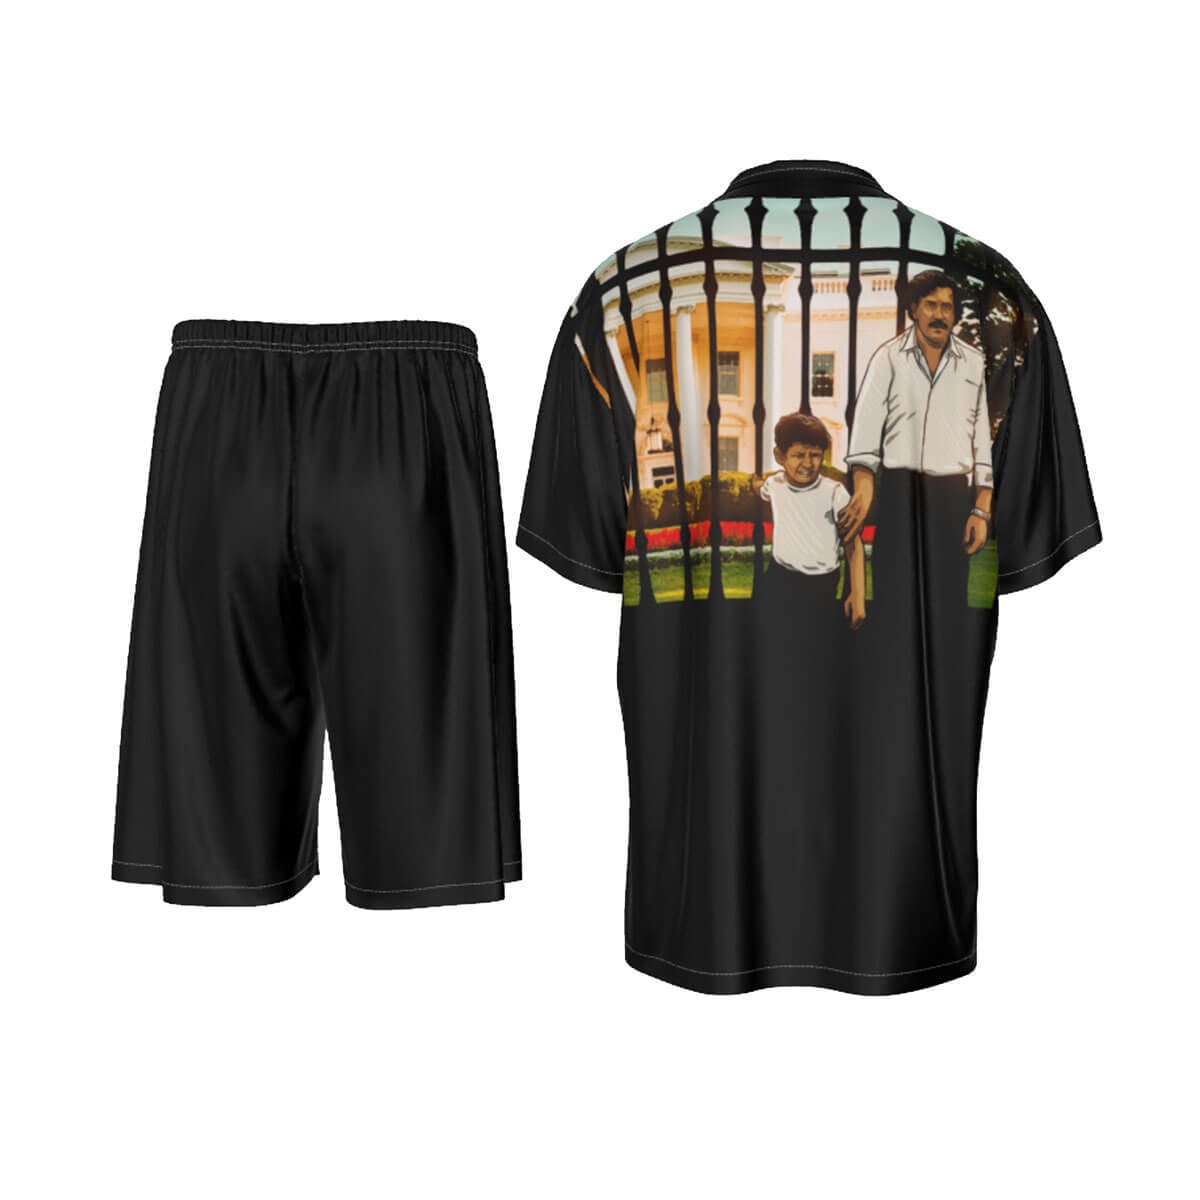 Pablo Escobar and his Son in US Silk Shirt Suit Set